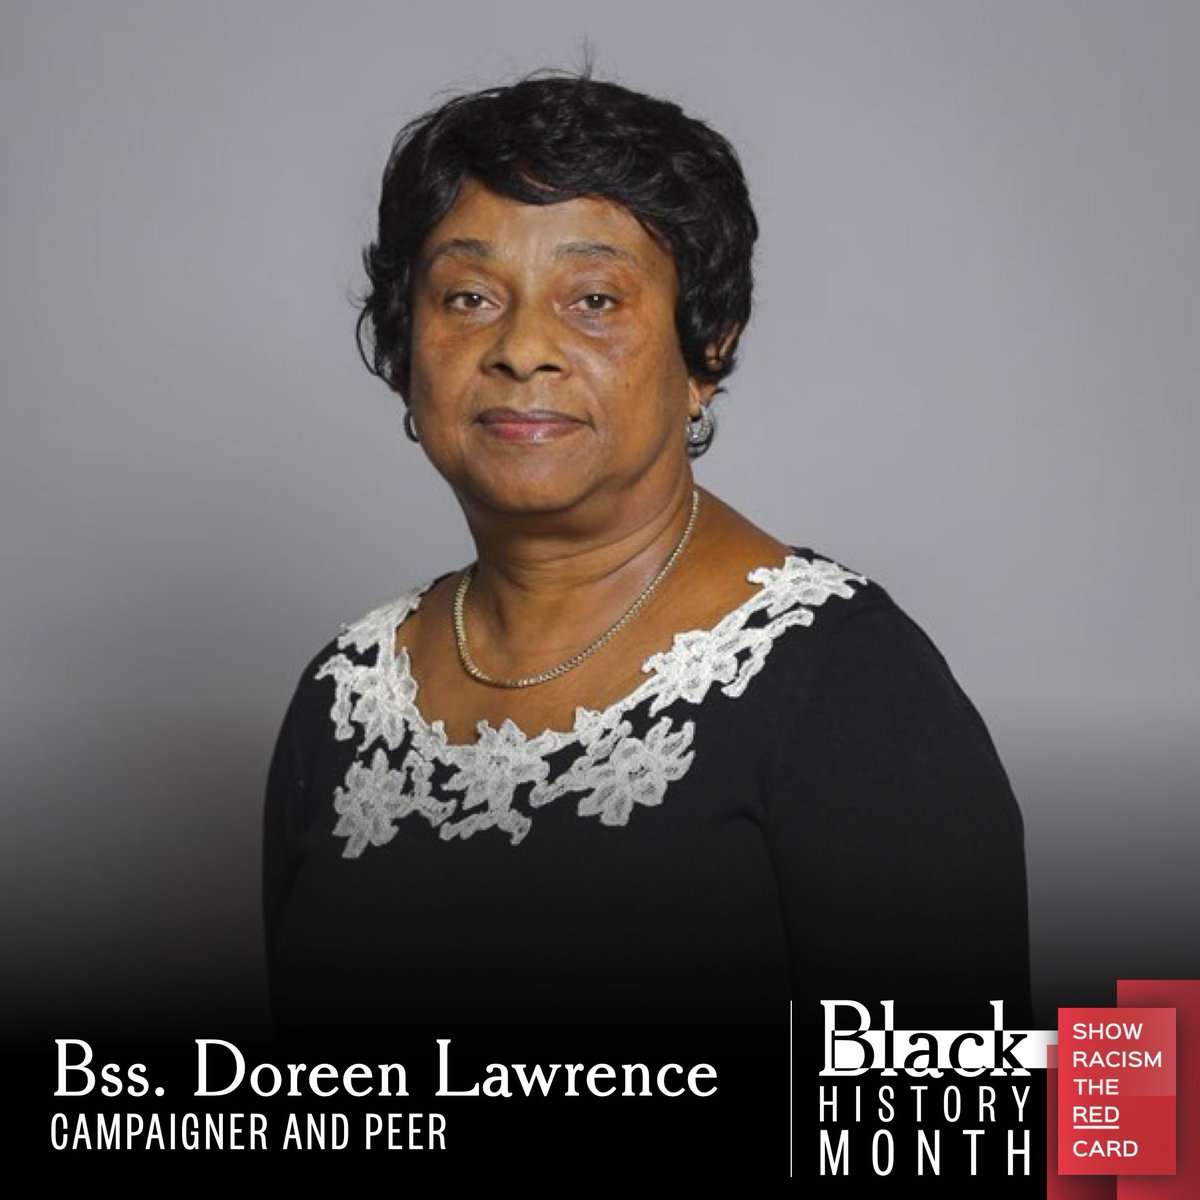 #BLACKHISTORYMONTH: Doreen Lawrence has spent 28 years campaigning for justice for her son Stephen, who was murdered in a racist attack in 1993 - as well as for the rights of other victims of racist crimes. She was made a life peer in 2013 for her commitment to race relations.